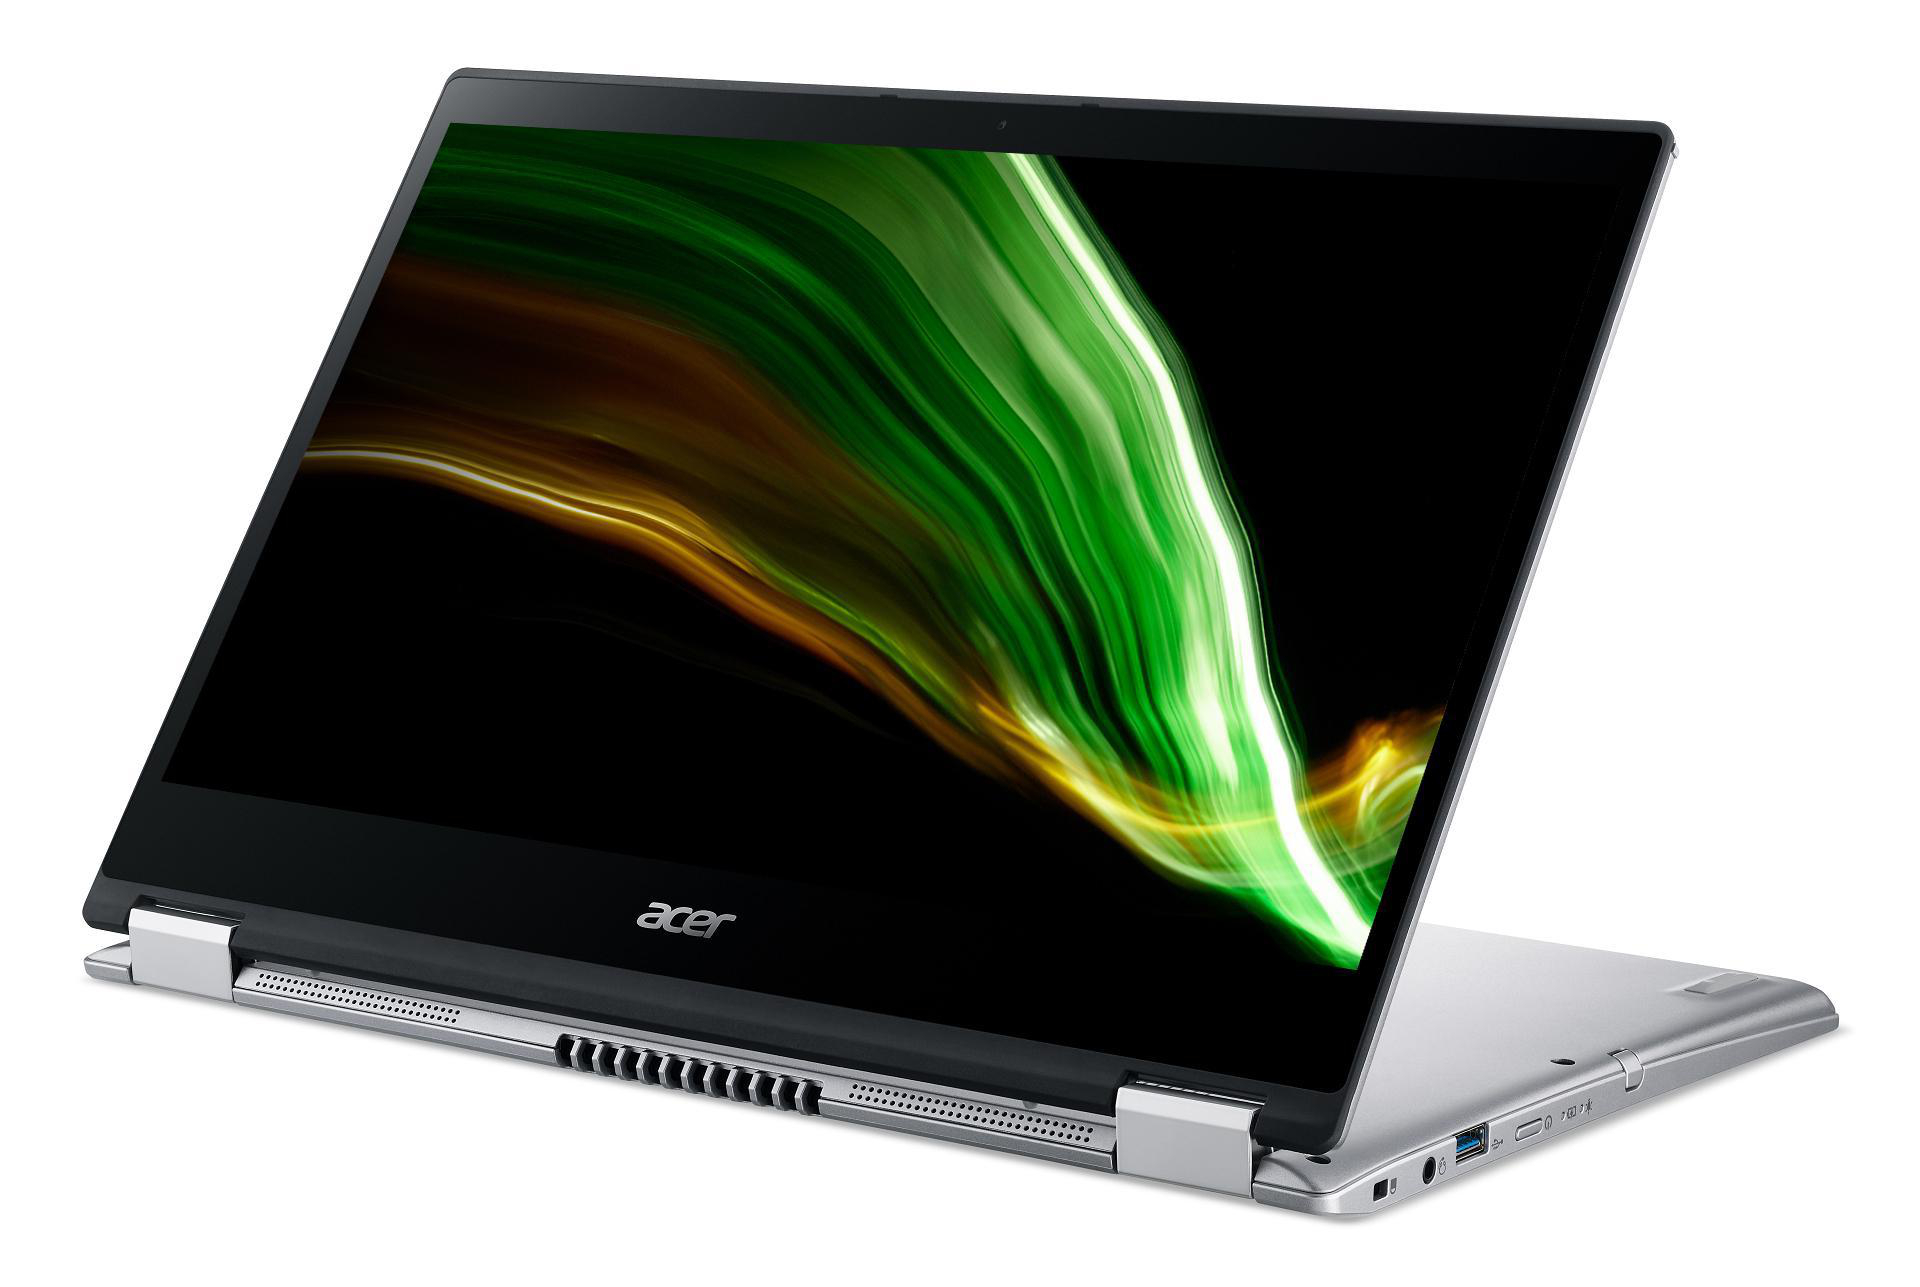 ACER Acer Spin 3 SSD, GB Silber Radeon™ Bit) Silver AMD Onboard S-Modus GB 4 Notebook, Zoll AMD, (64 14 Athlon™ Windows RAM, Touchscreen, Home Display Prozessor, 128 Graphics, 10 (SP314-21N-R686), mit